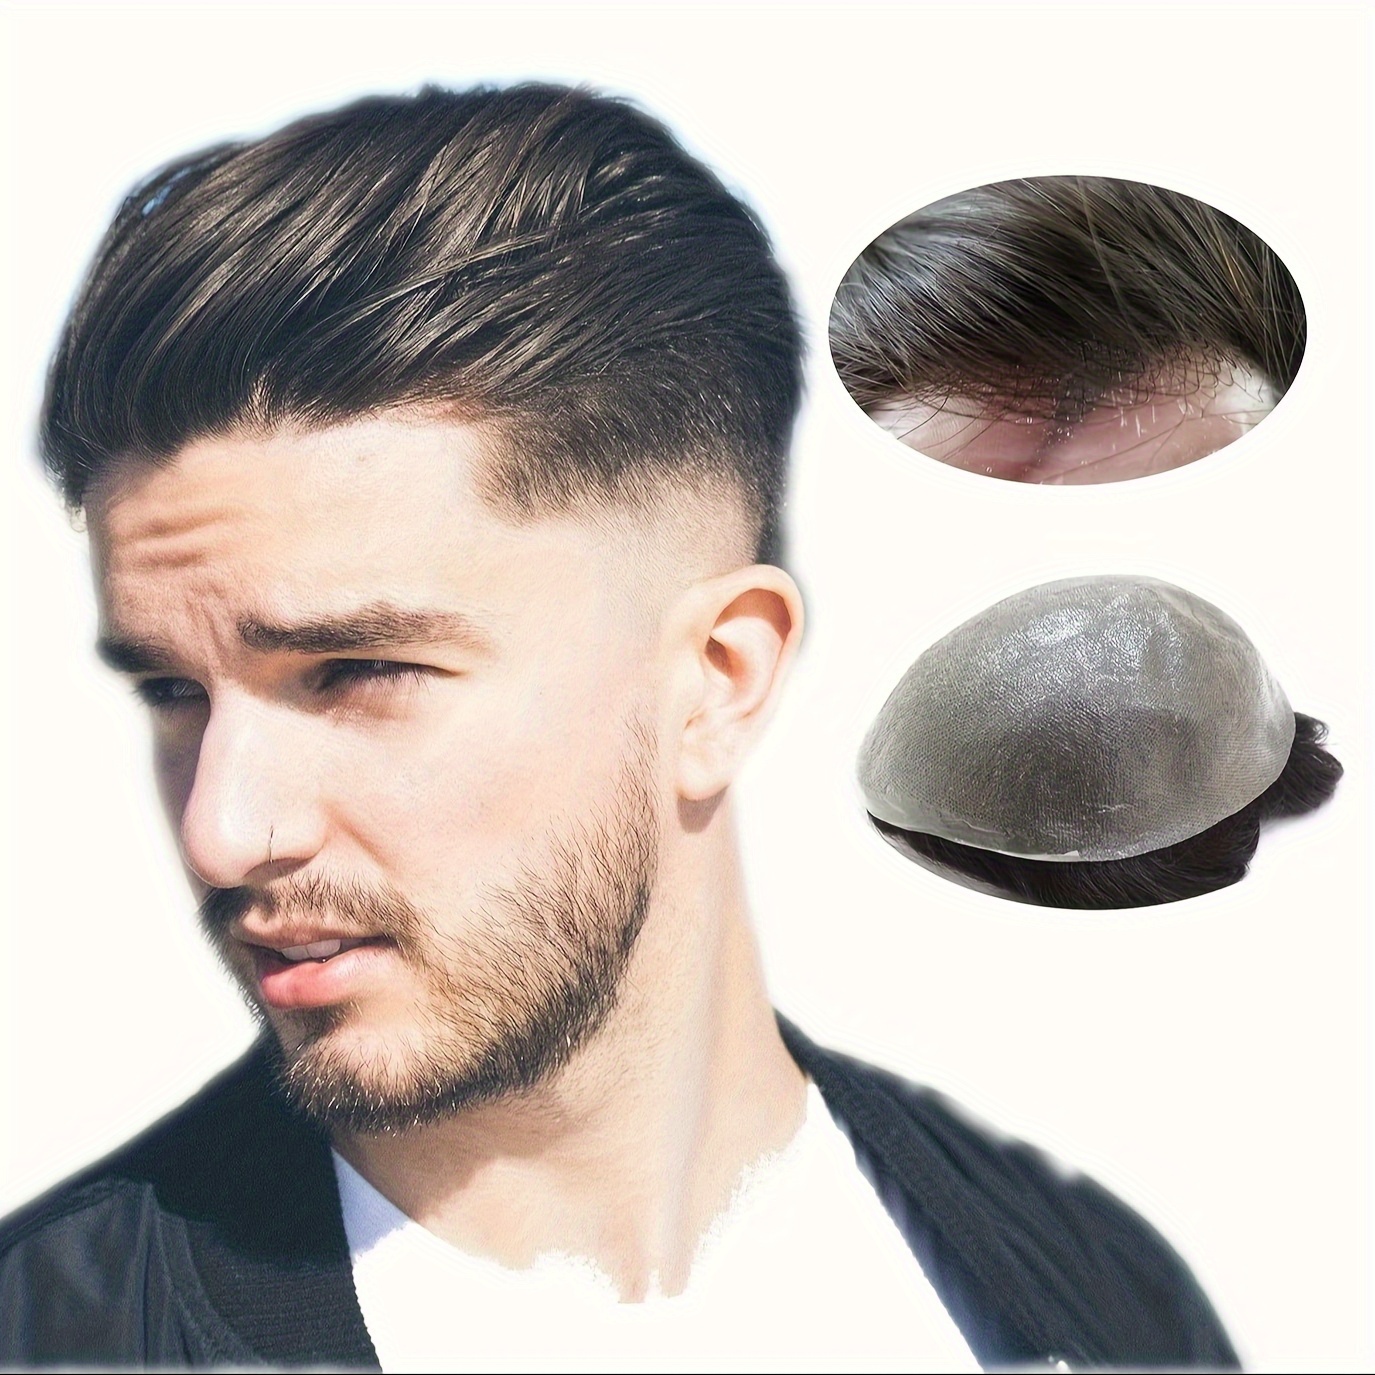 

Toupee For Men With 100% Human Hair, 0.08mm Natural Skin Hair Pieces Replacement For Men Base Size 6*8 Inch/15*20cm Mens Toupee V-looped Hair System Natural Black